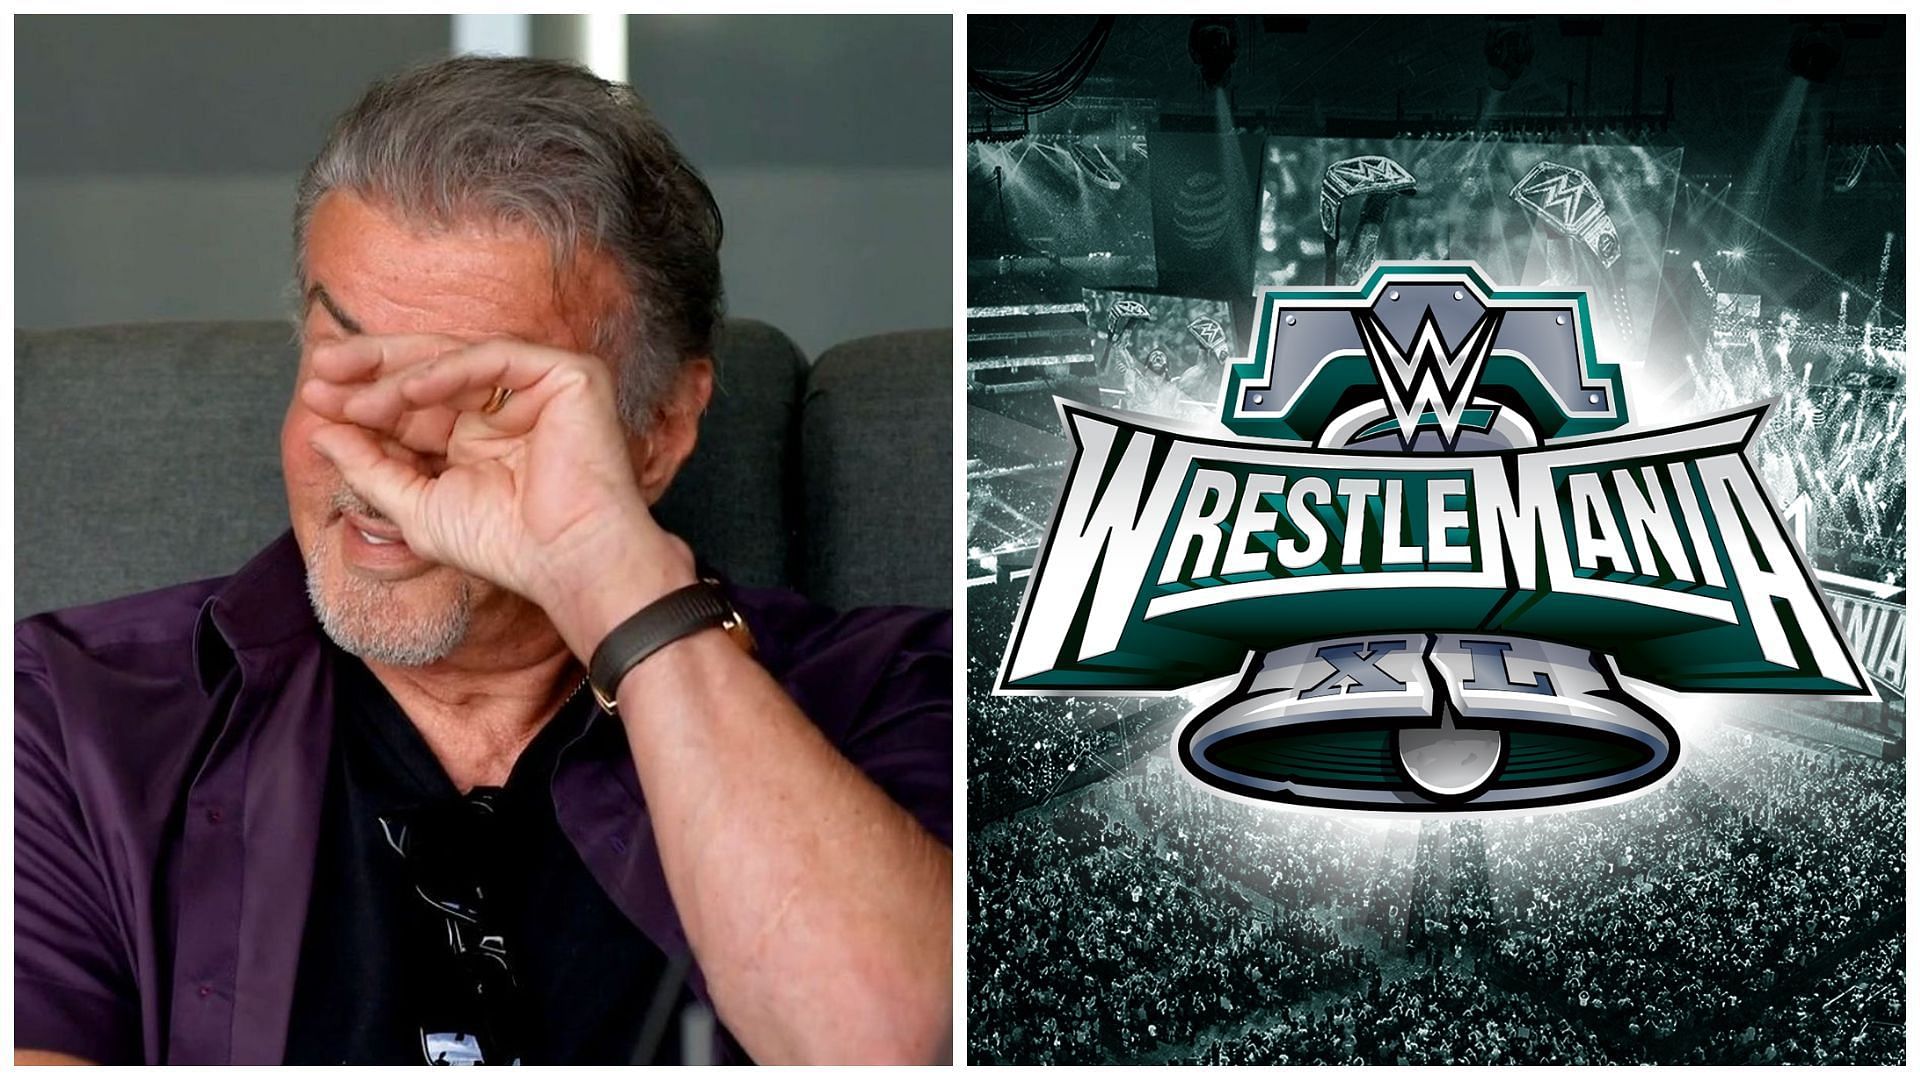 WWE is interested in collaborating with Sylvester Stallone for WrestleMania in some form.